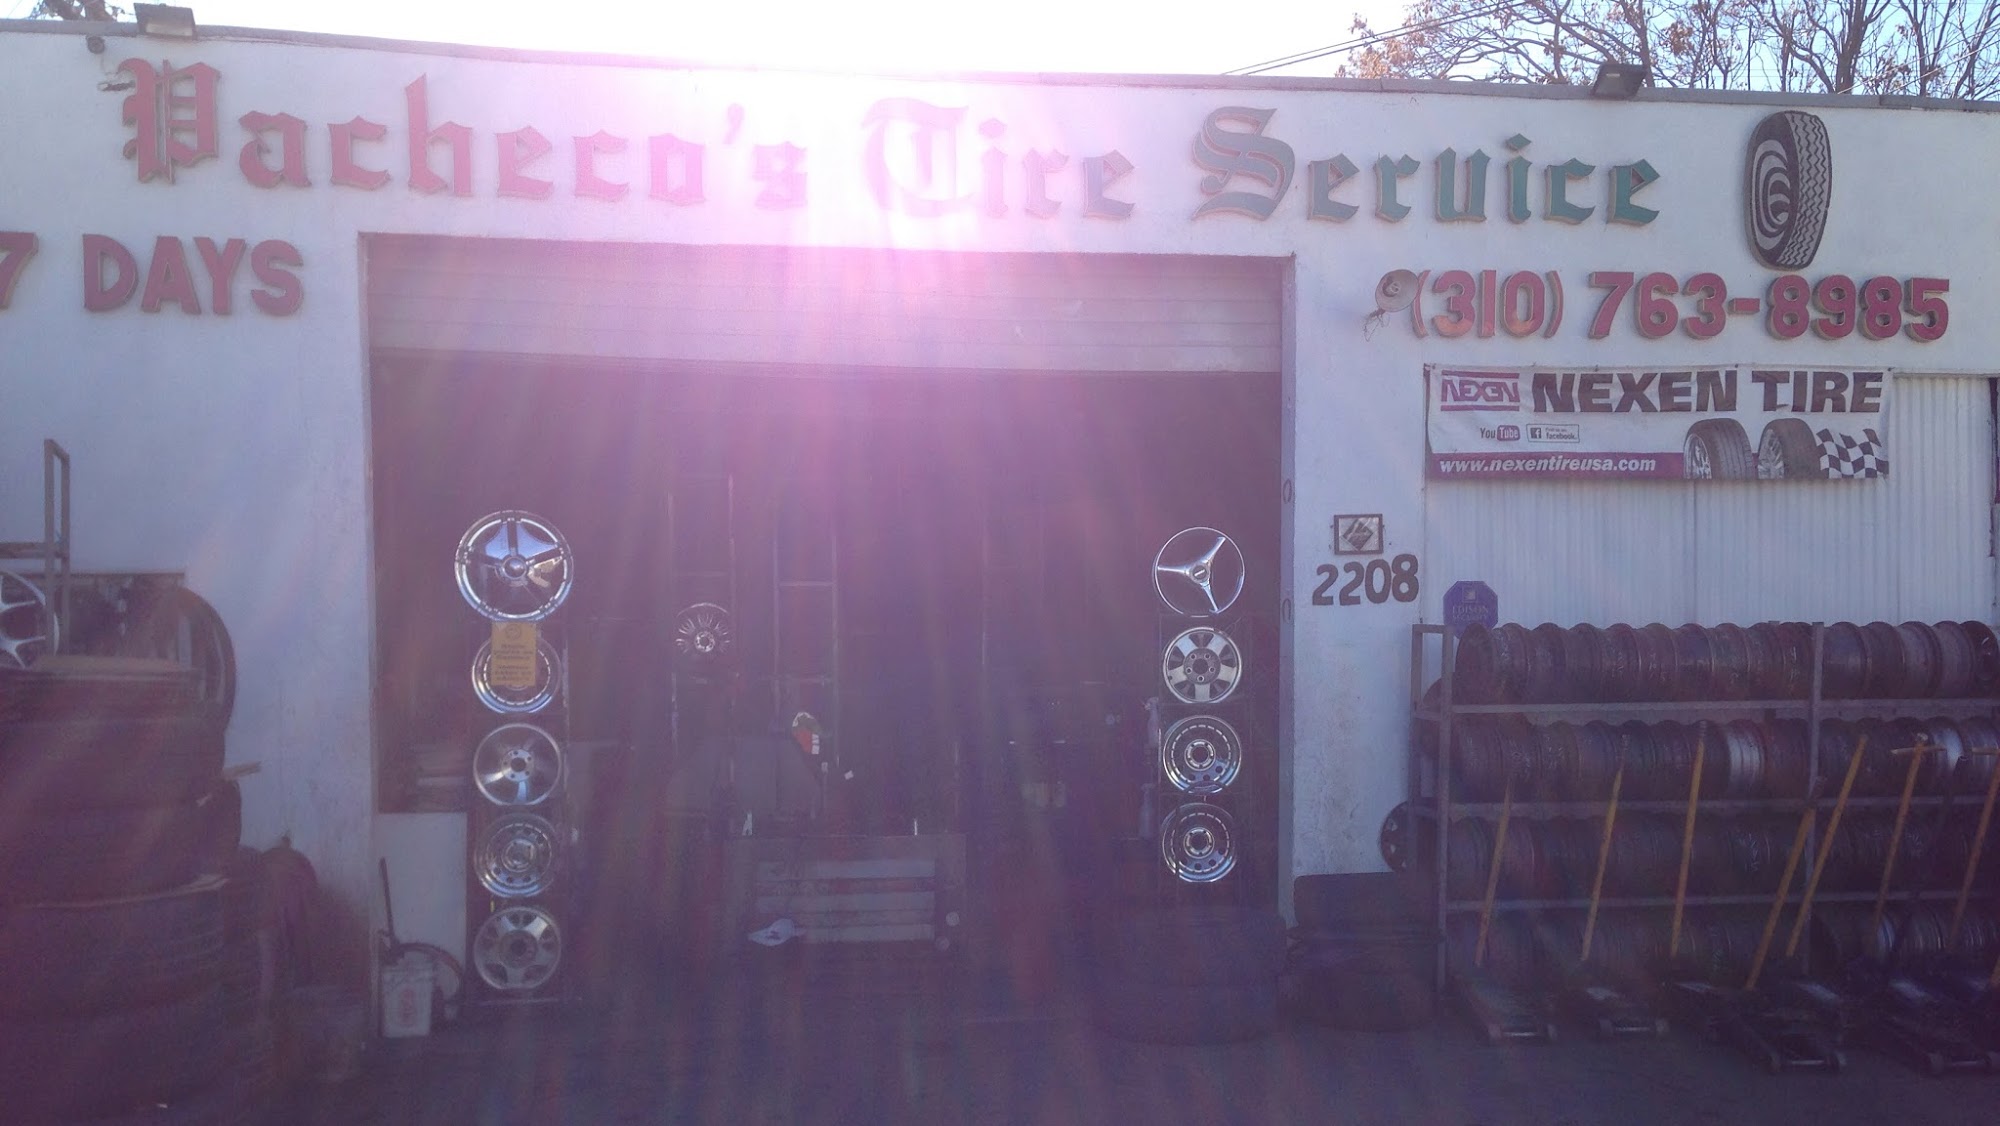 Pacheco's Tire Services